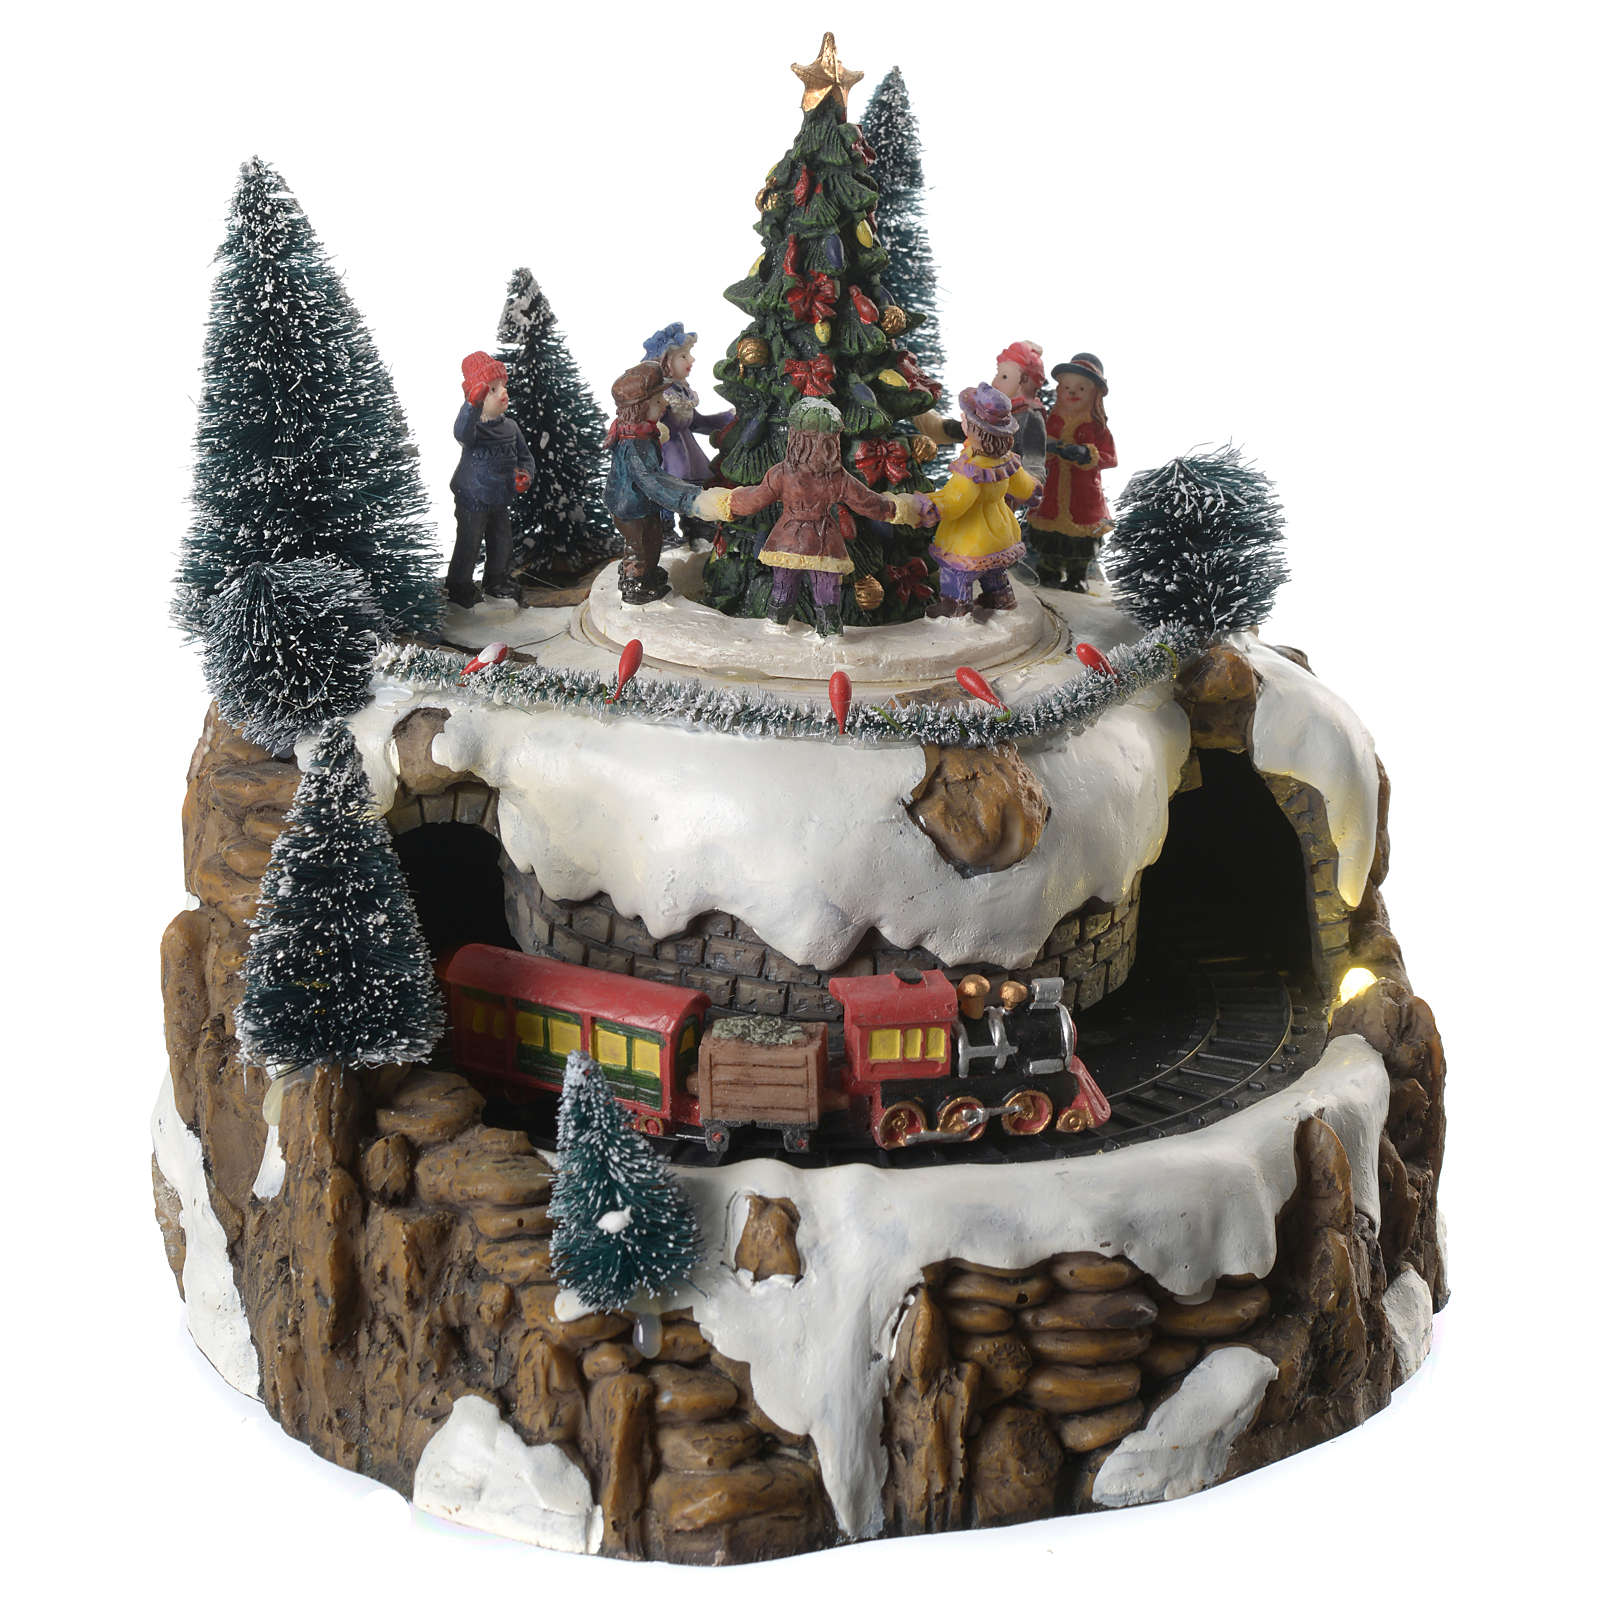 Christmas village ornament with animated train and children, | online sales on HOLYART.com